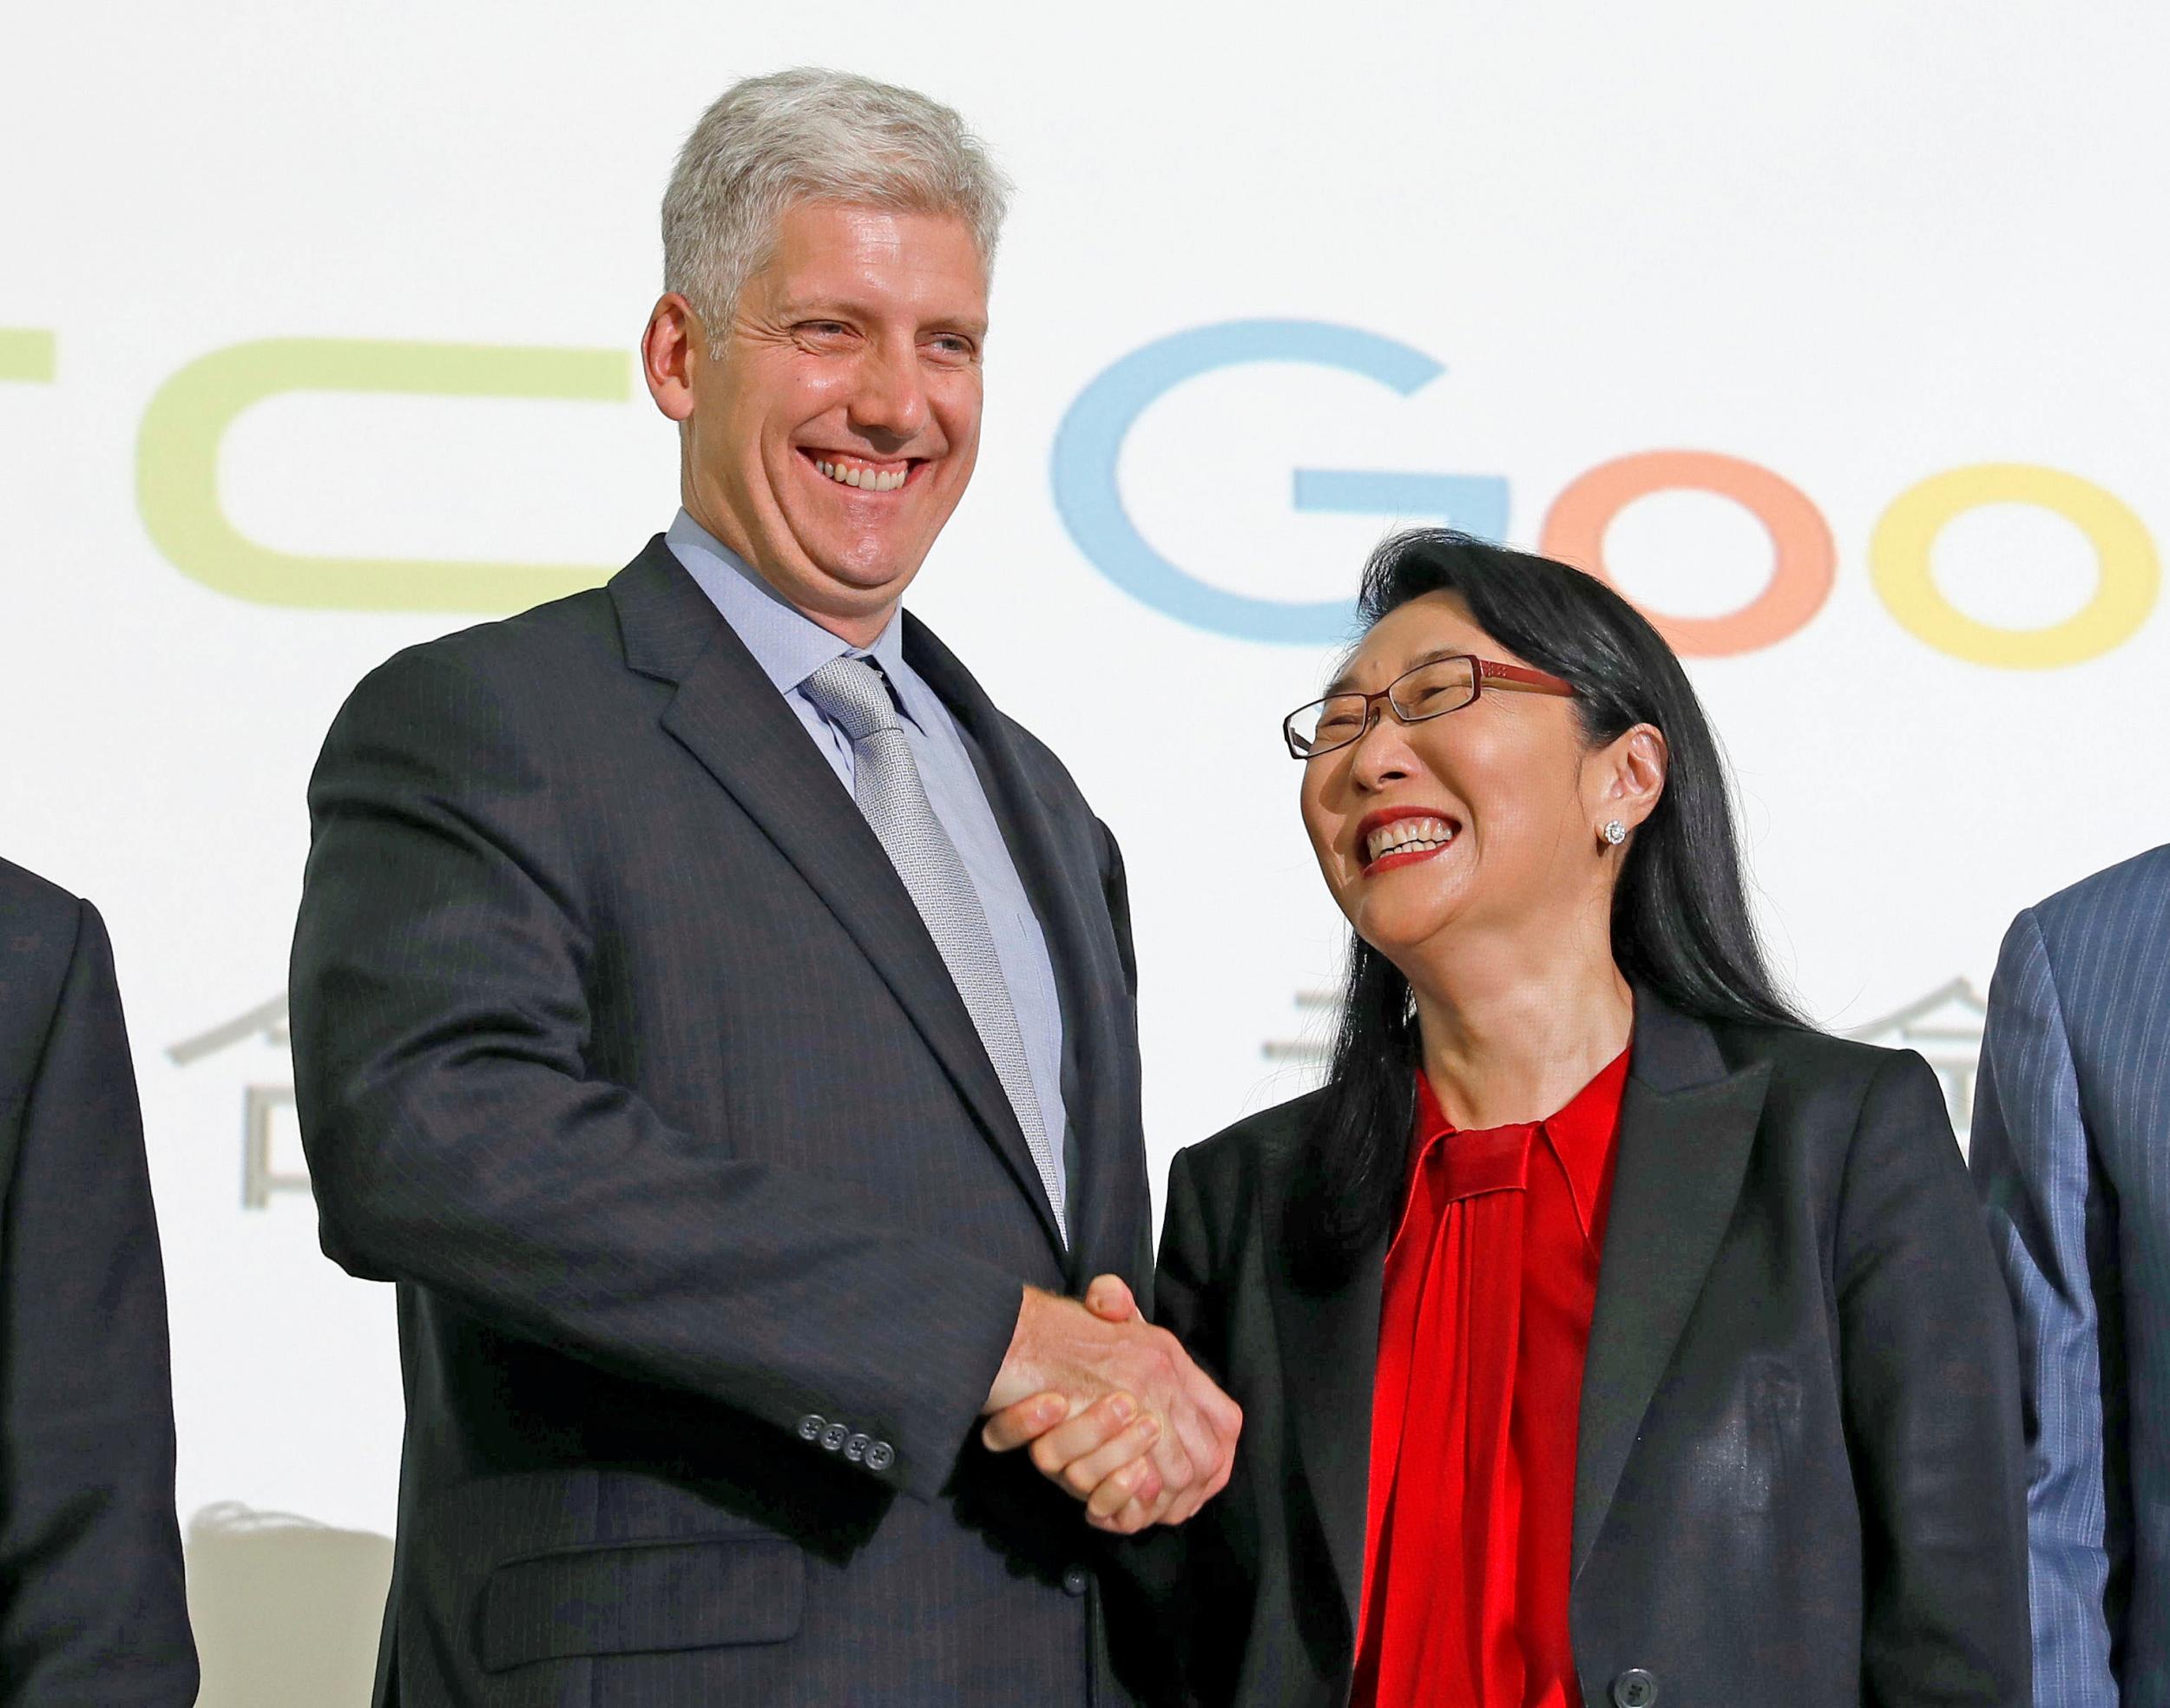 Google has struck a deal with smartphone maker HTC